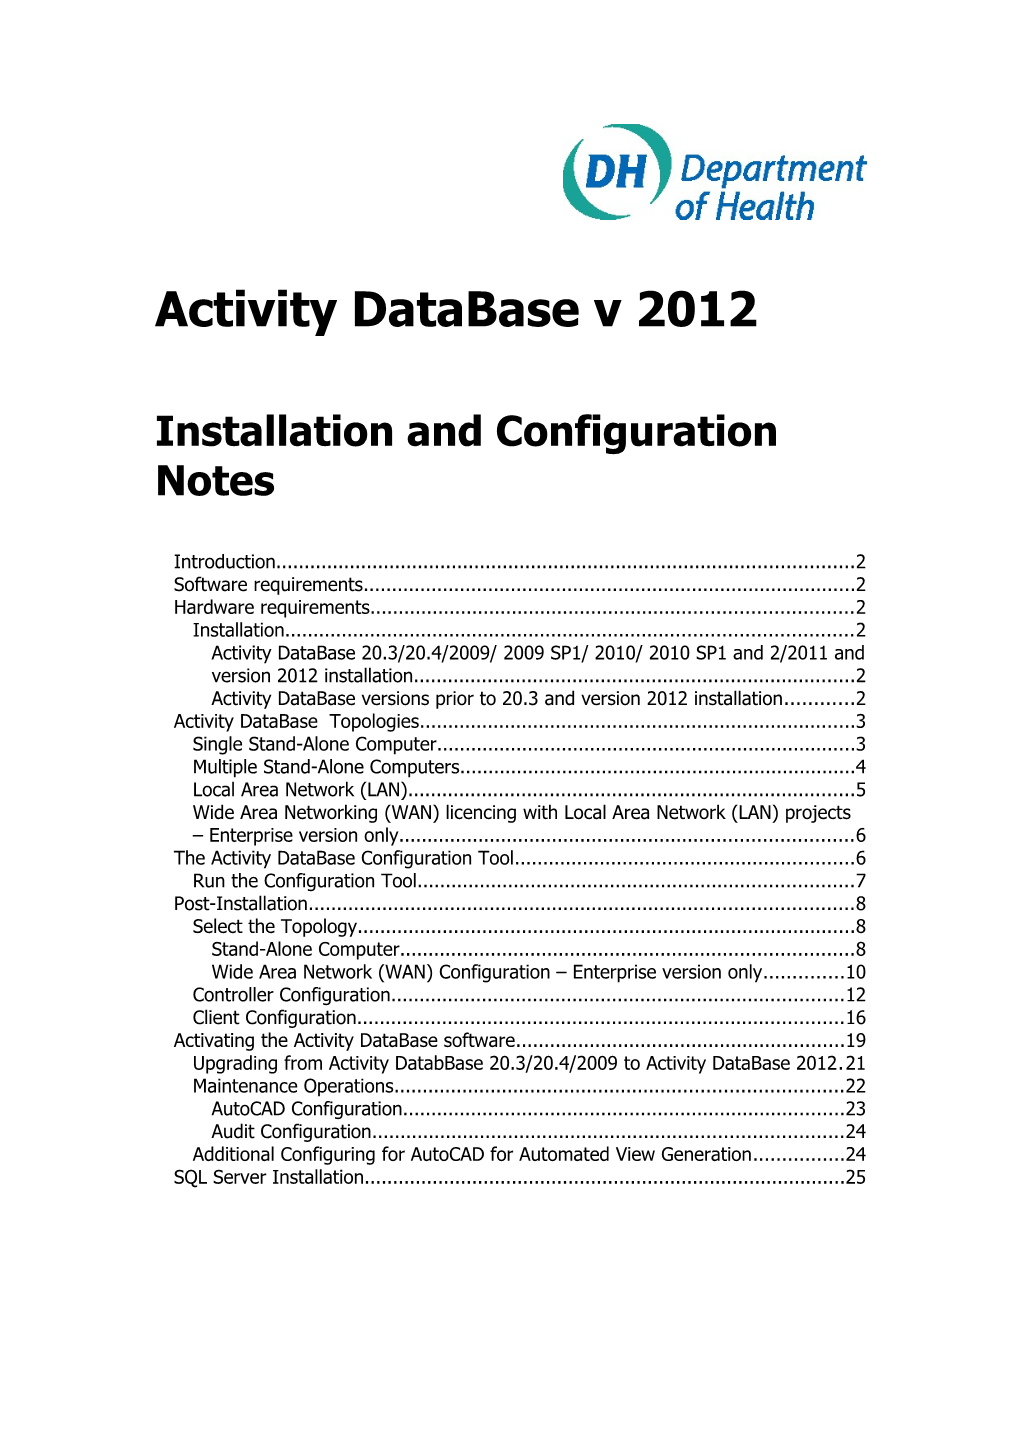 Installation and Configuration Notes